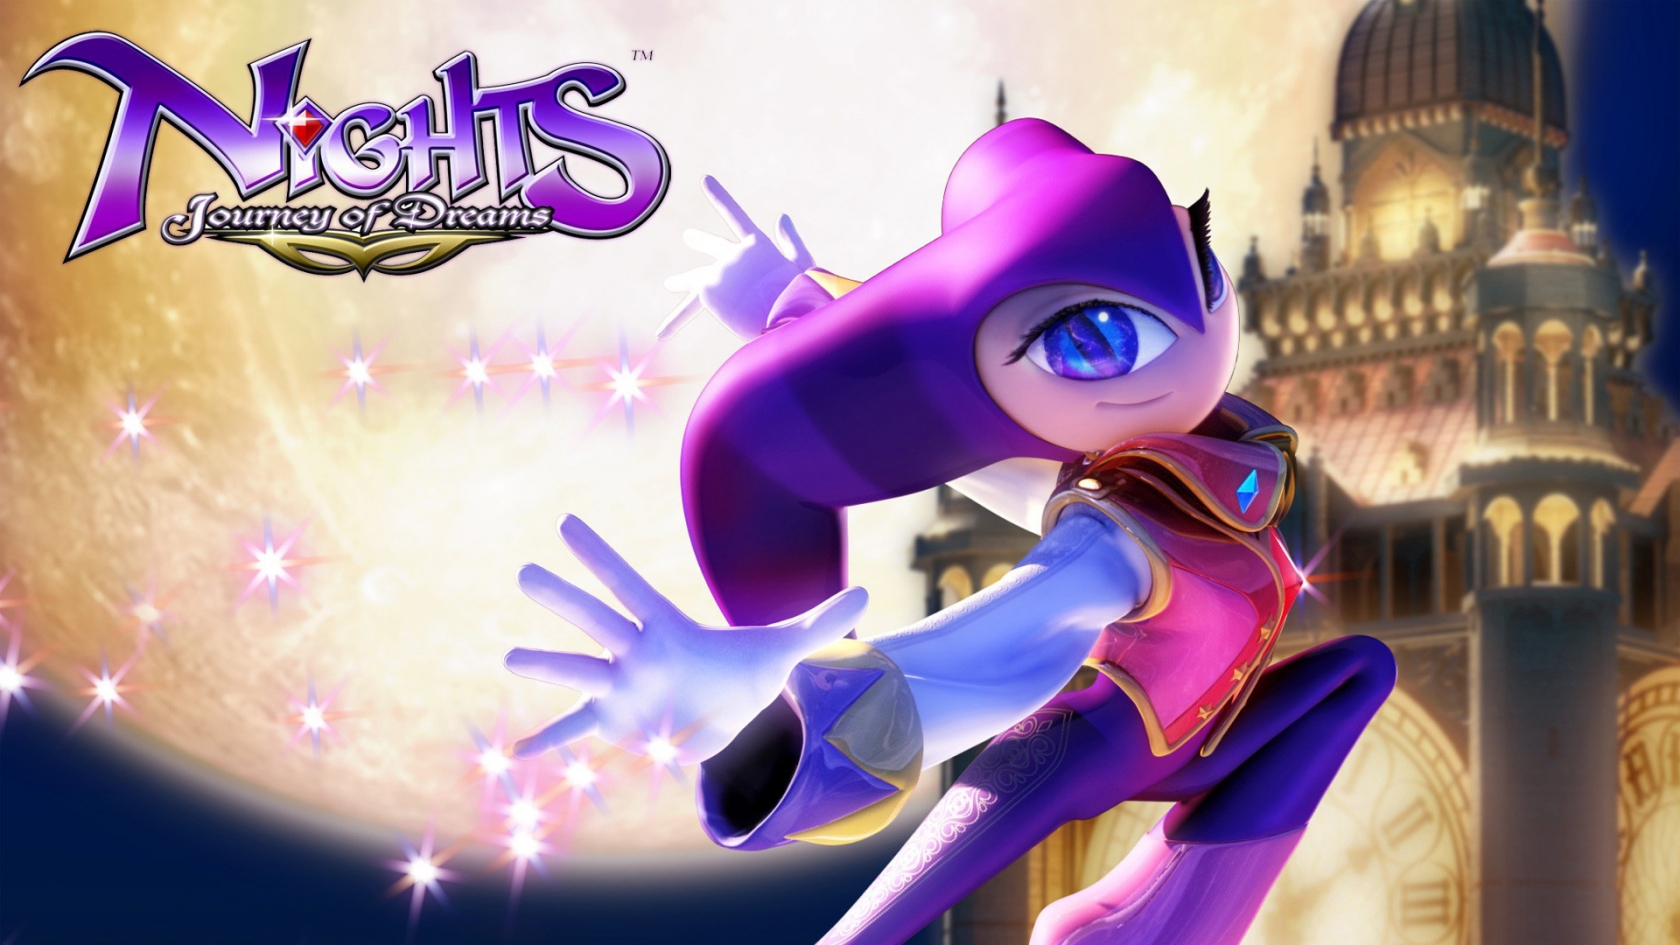 NiGHTS: Journey of Dreams for 1680 x 945 HDTV resolution